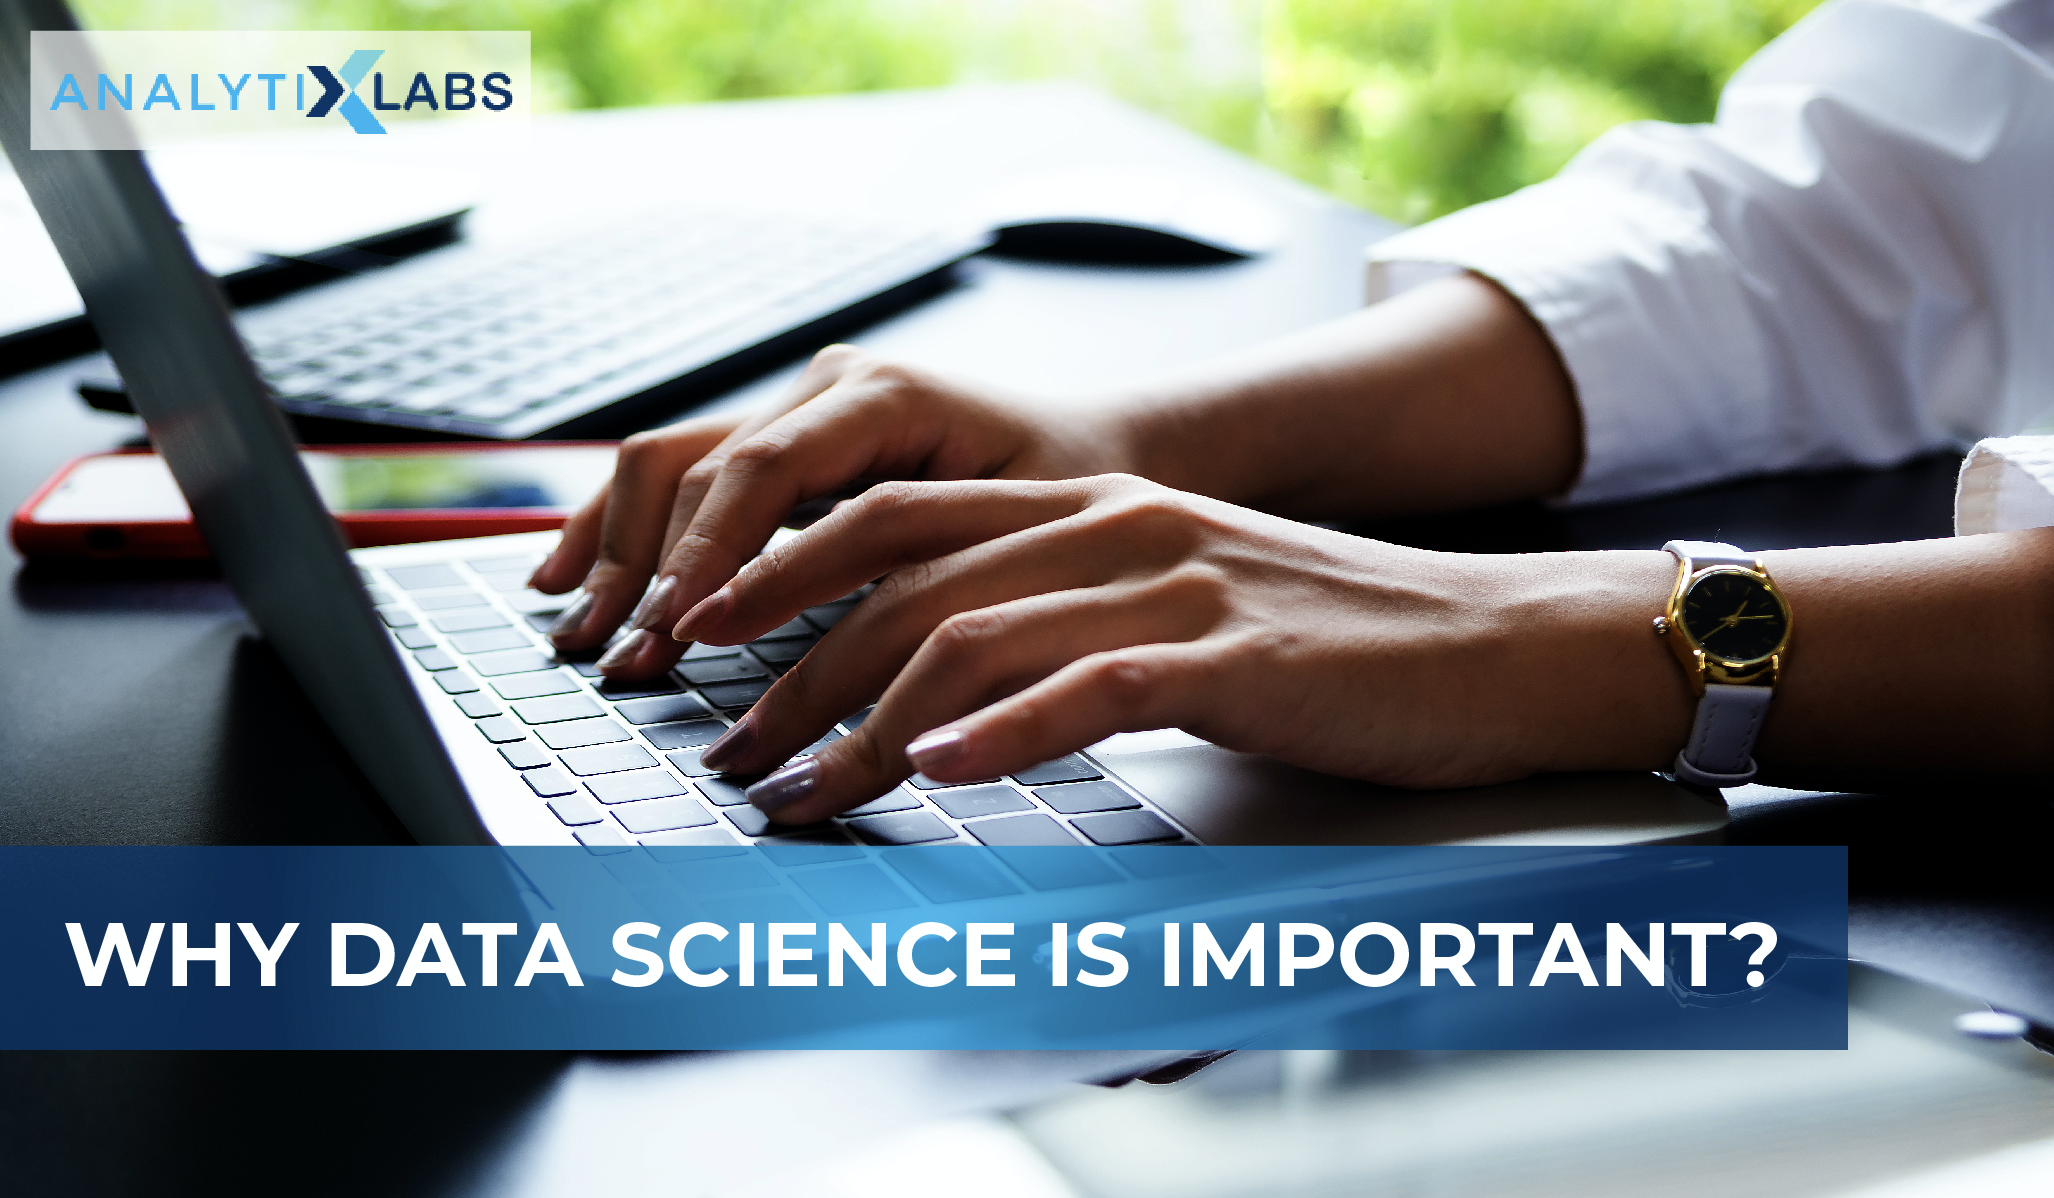 What is a data scientist? A key data analytics role and a